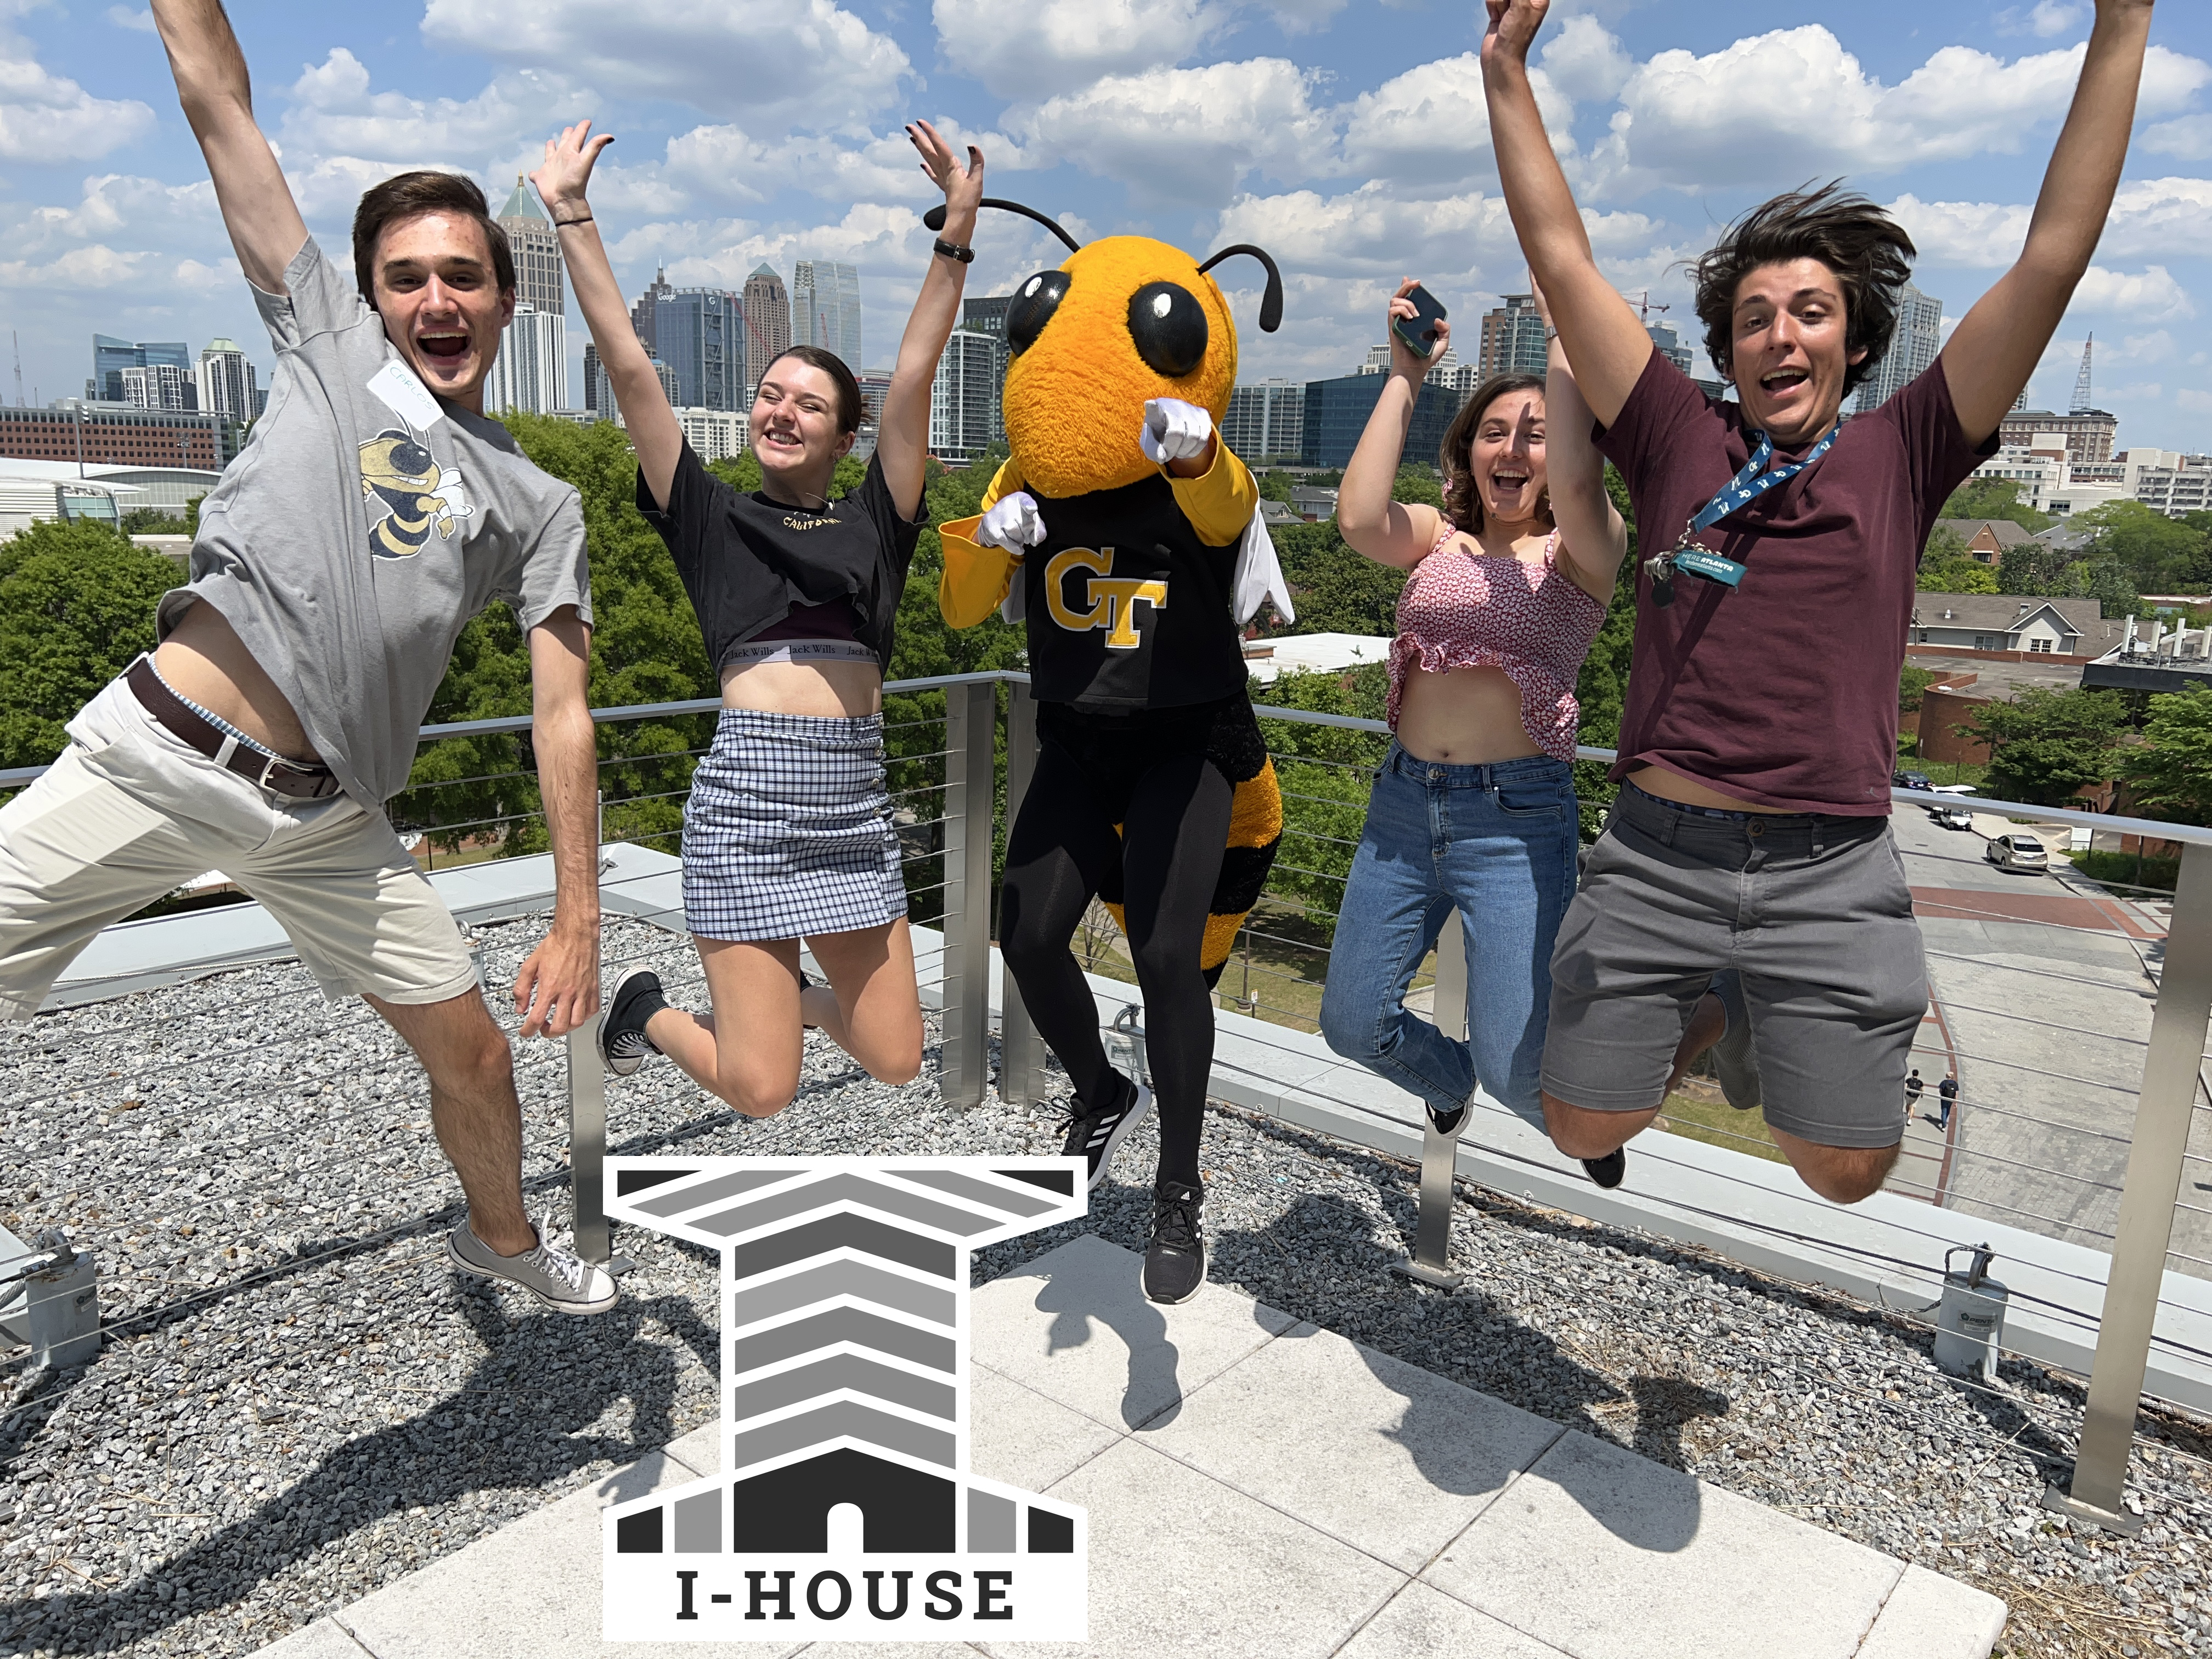 I-House students with Buzz